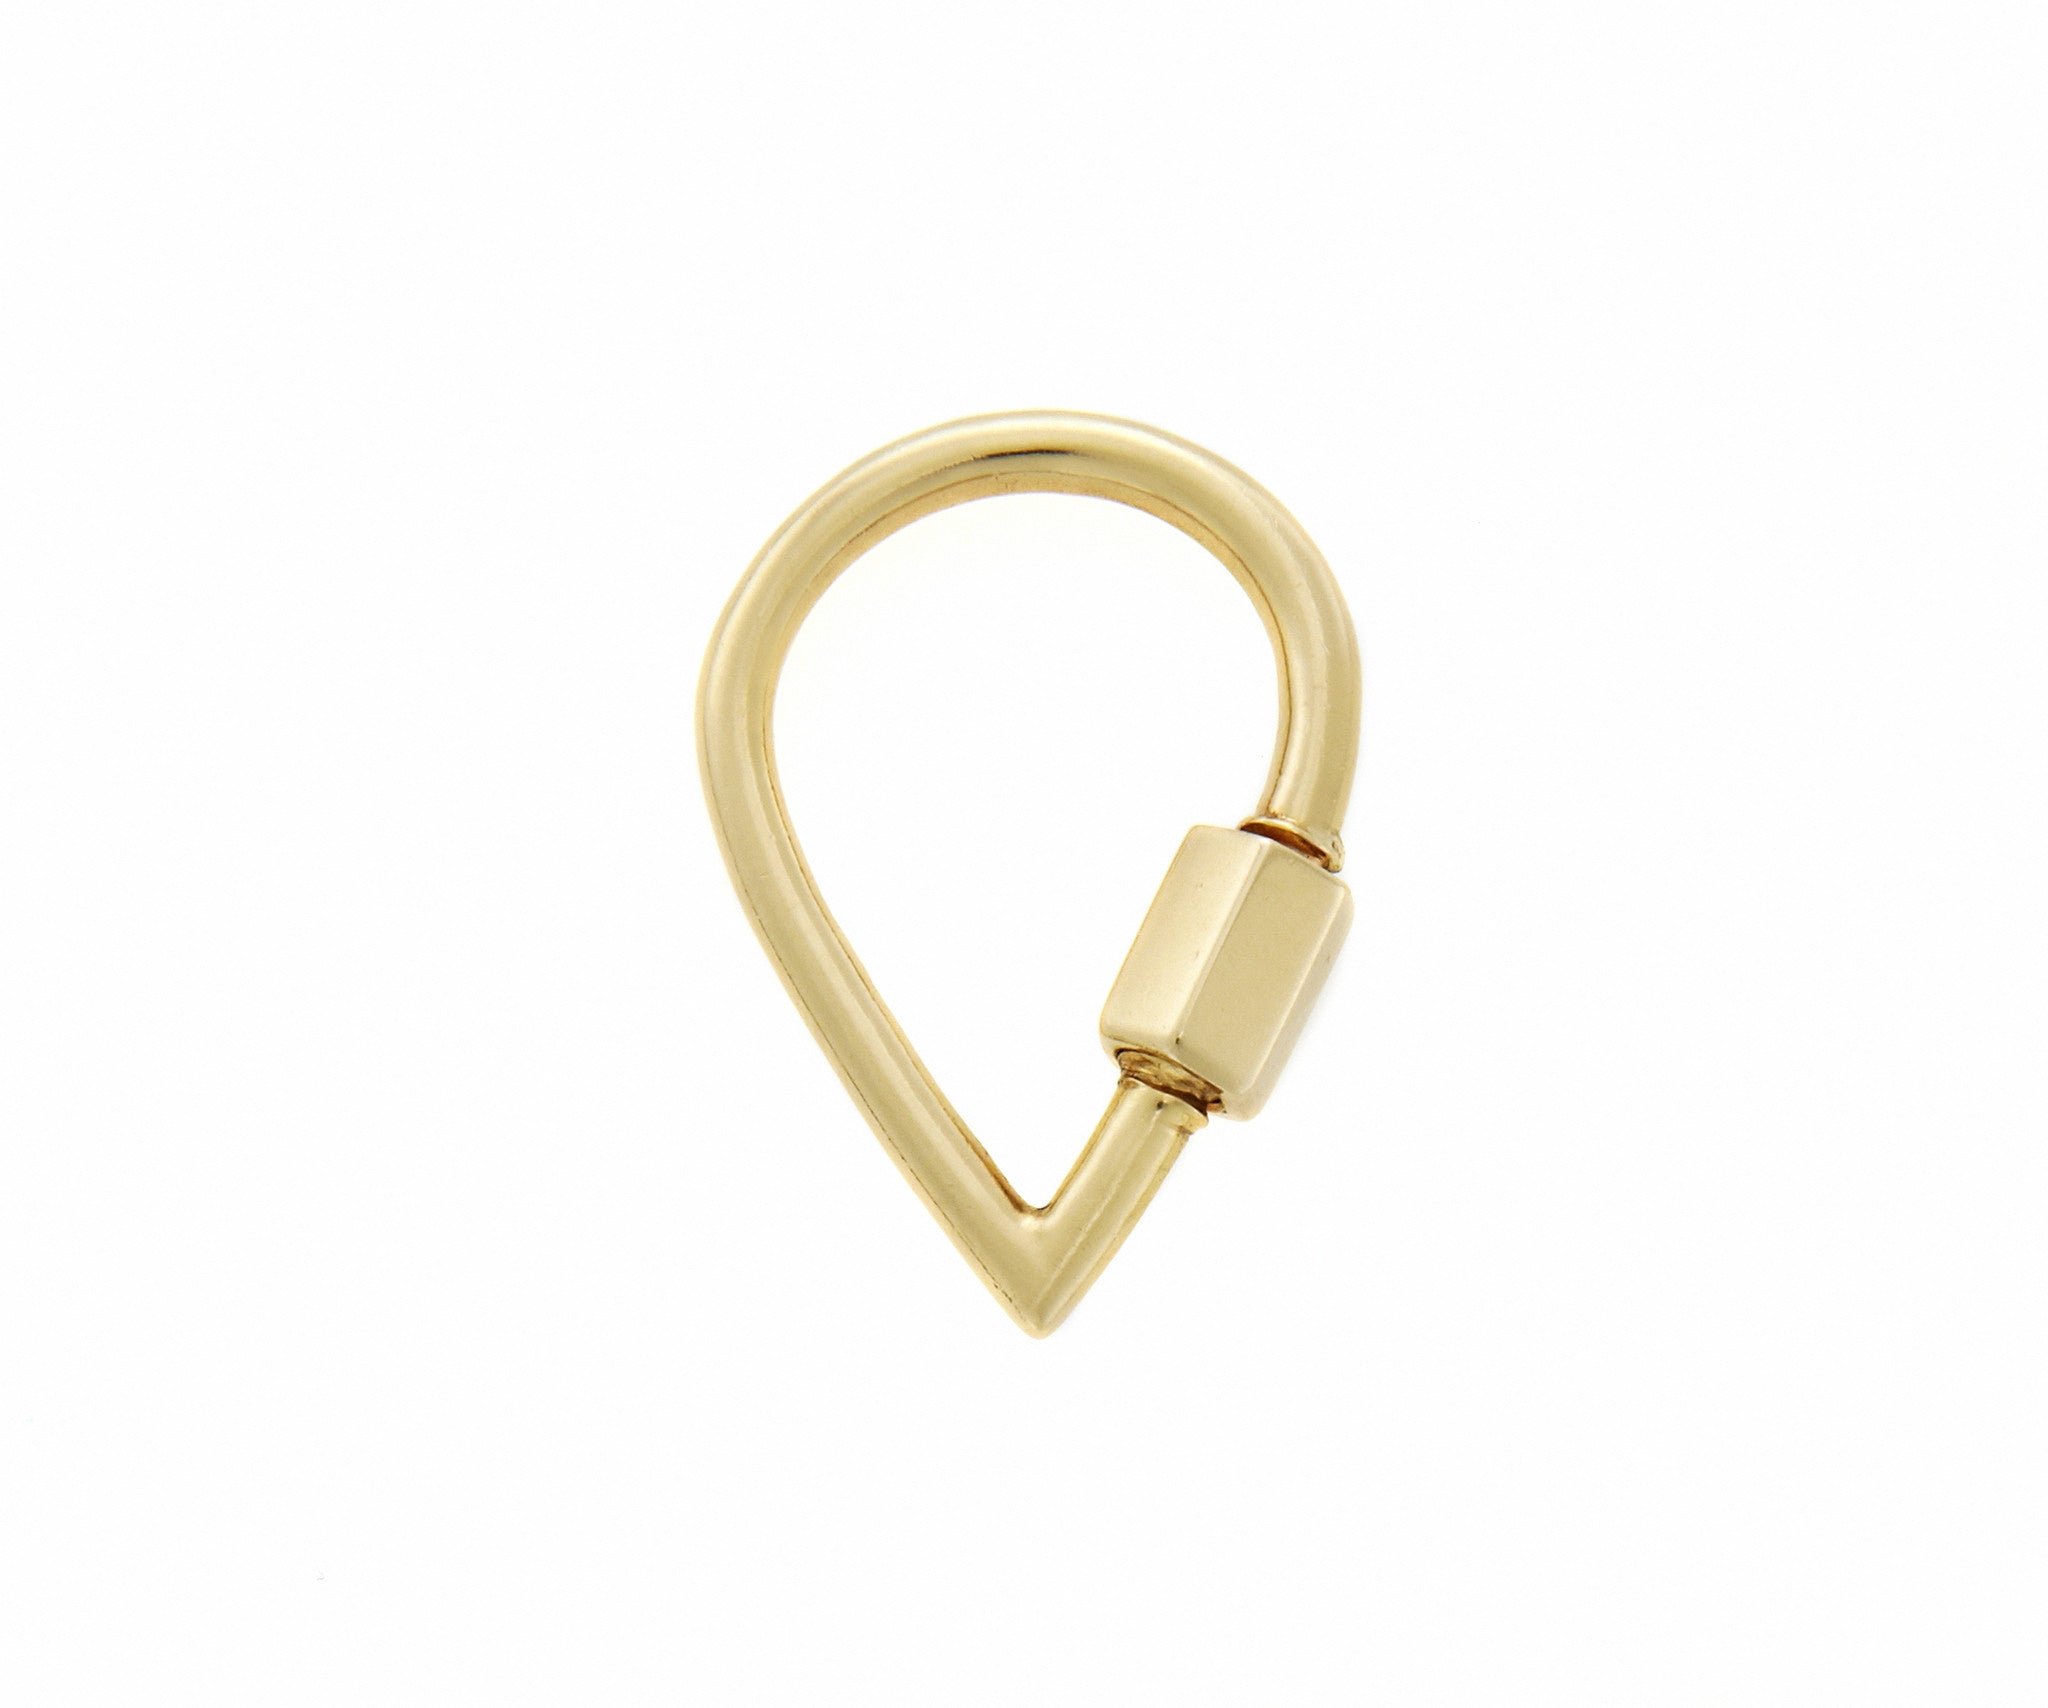 Yellow gold drop lock charm with closed clasp